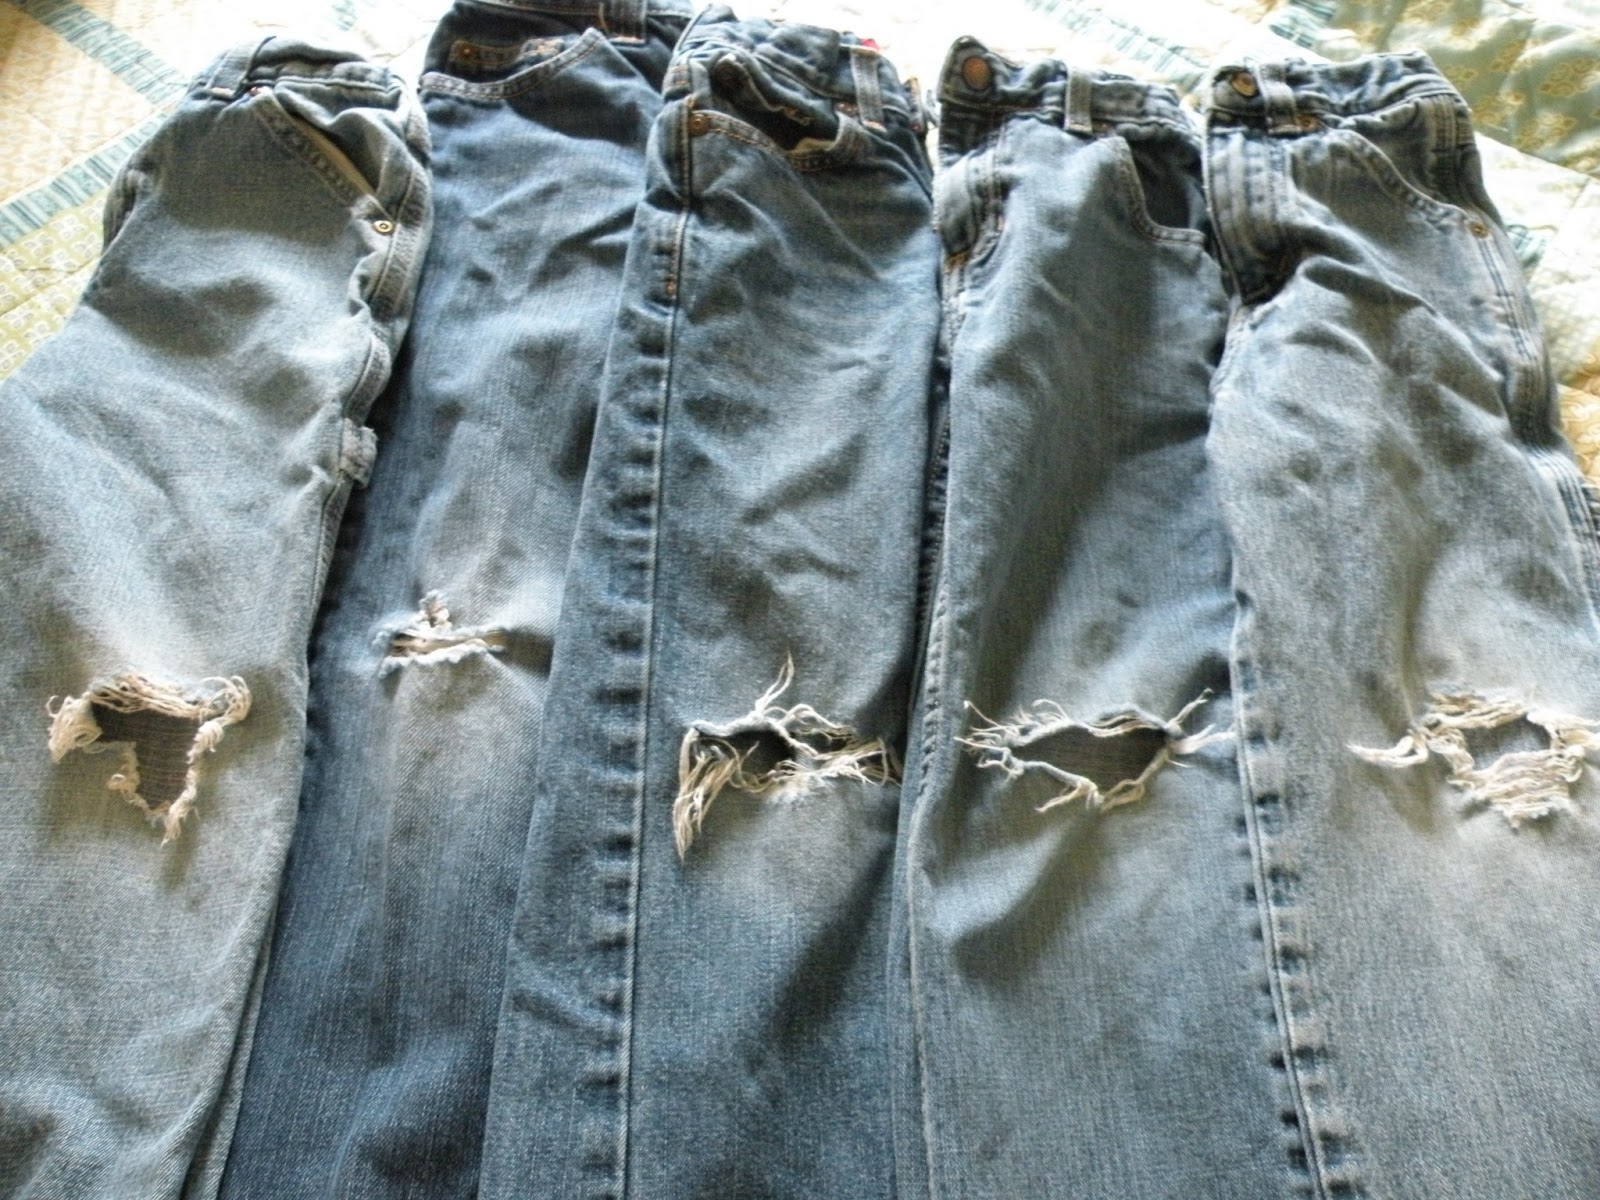 Breathing New Life Into Worn Out Jeans